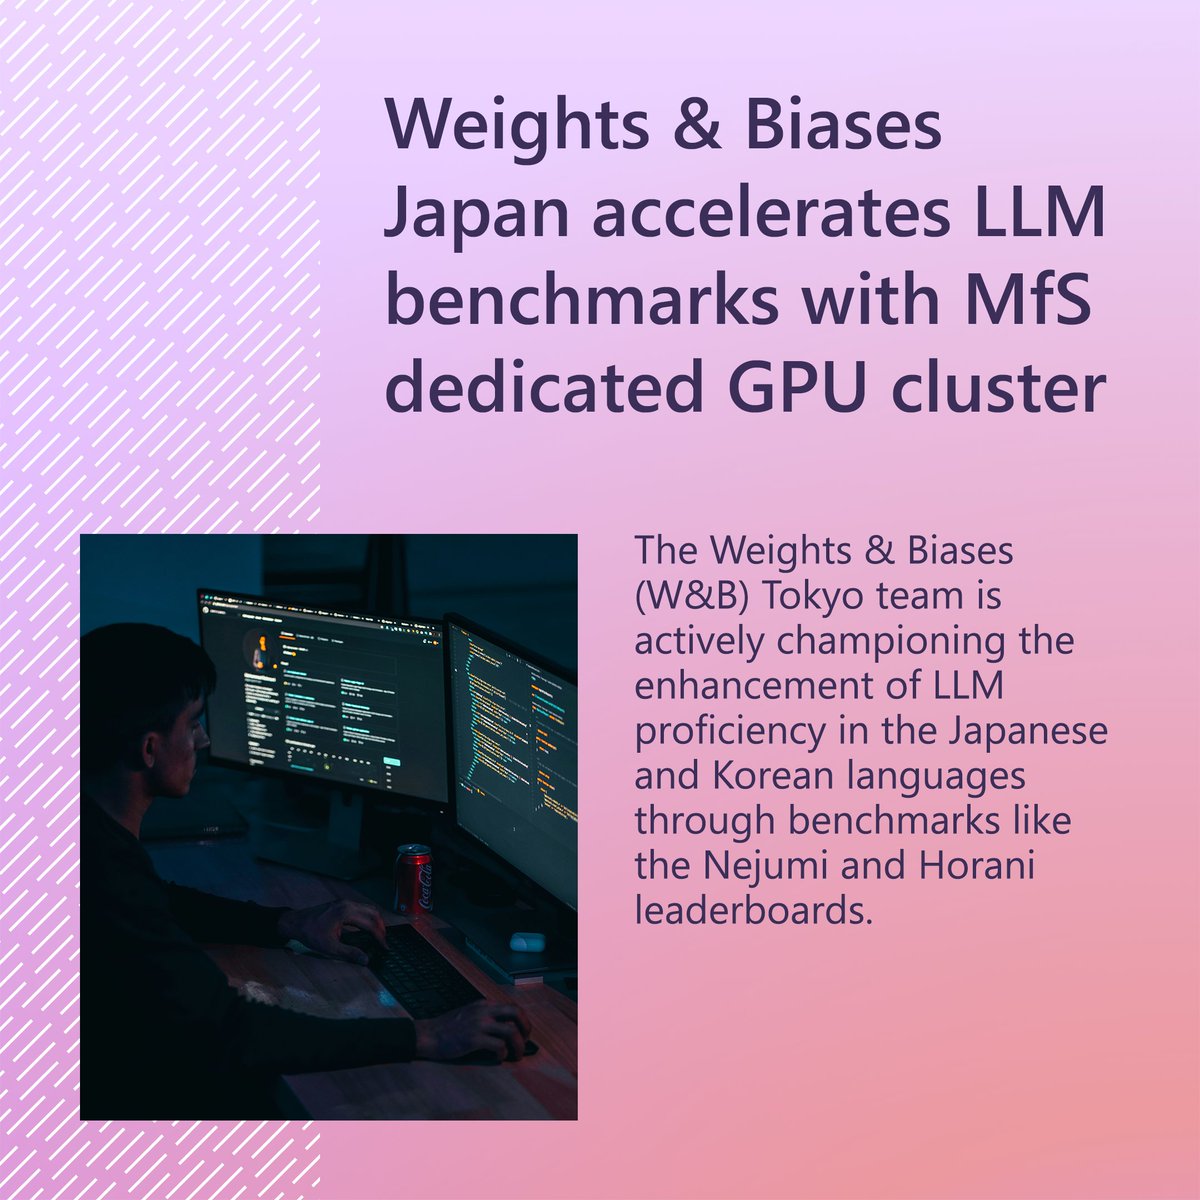 LLM benchmarks like @weights_biases Nejumi and Horani leaderboards are critical starting points for developers navigating build vs. buy decisions. Find out how AI founders can utilize the platform: msft.it/6016Y3HGa. #LLM #AI #Startup